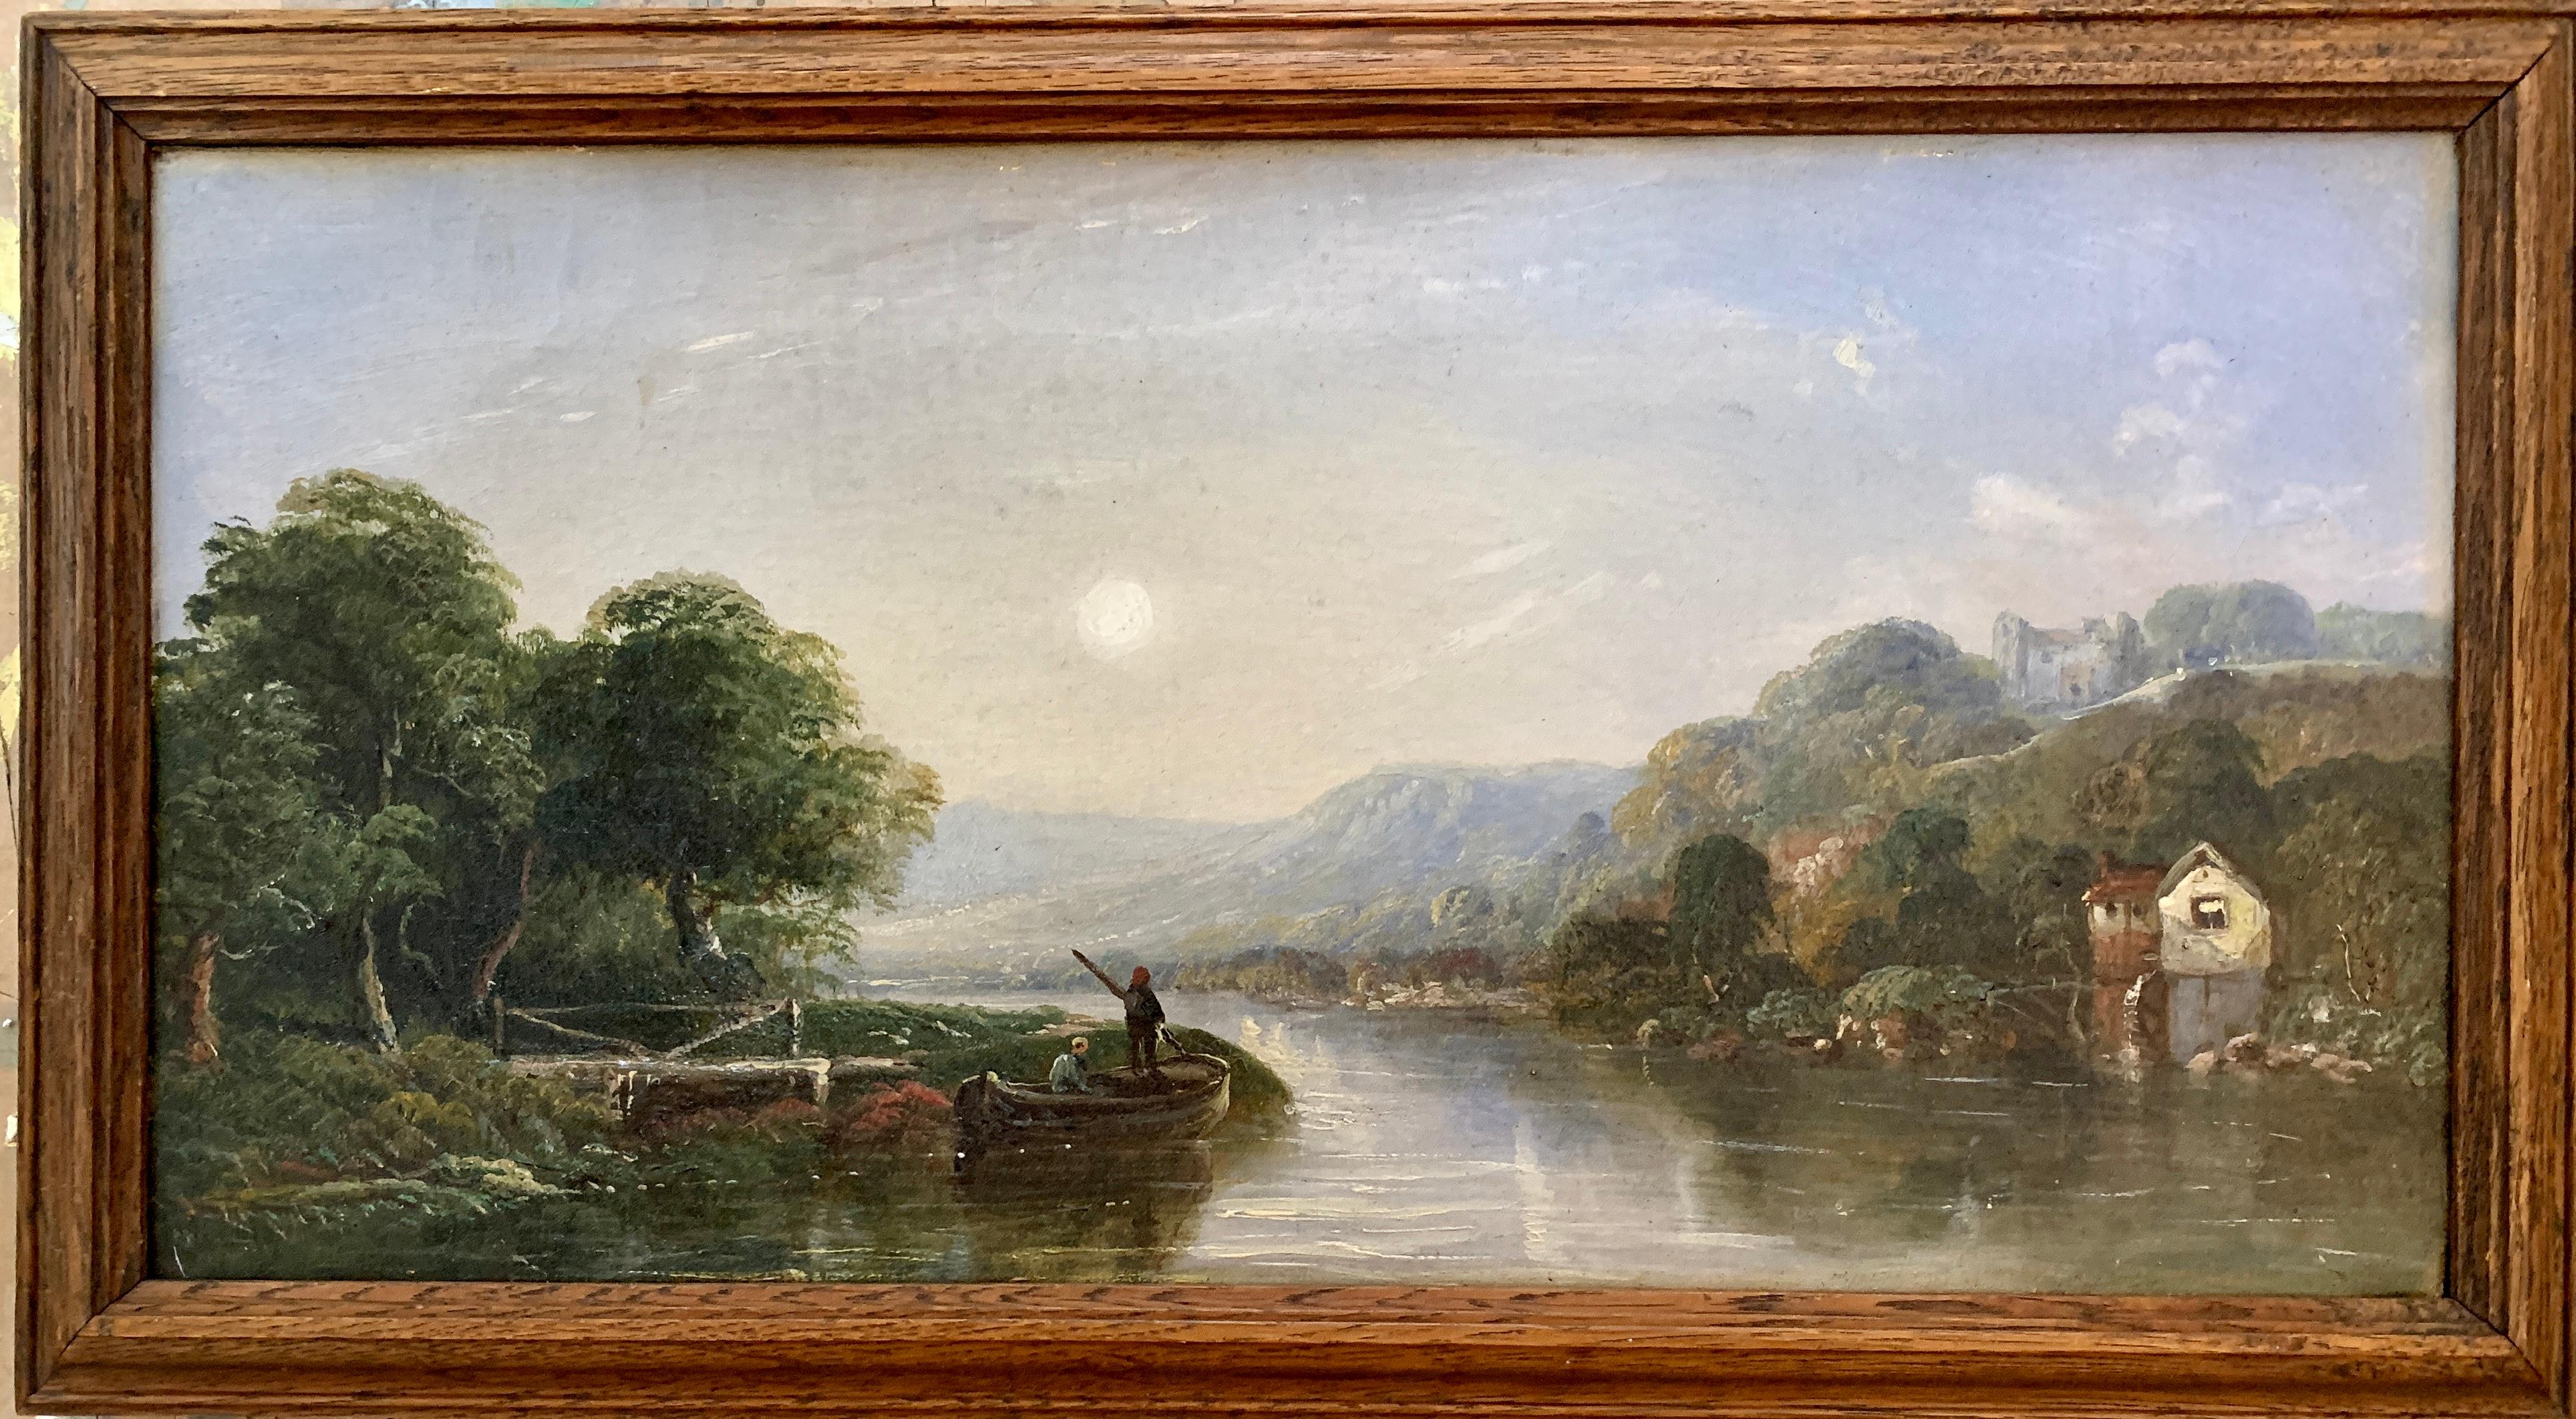 Victorian 19th century Moonlight landscape with river, fishermen and a watermill - Painting by J.Barclay